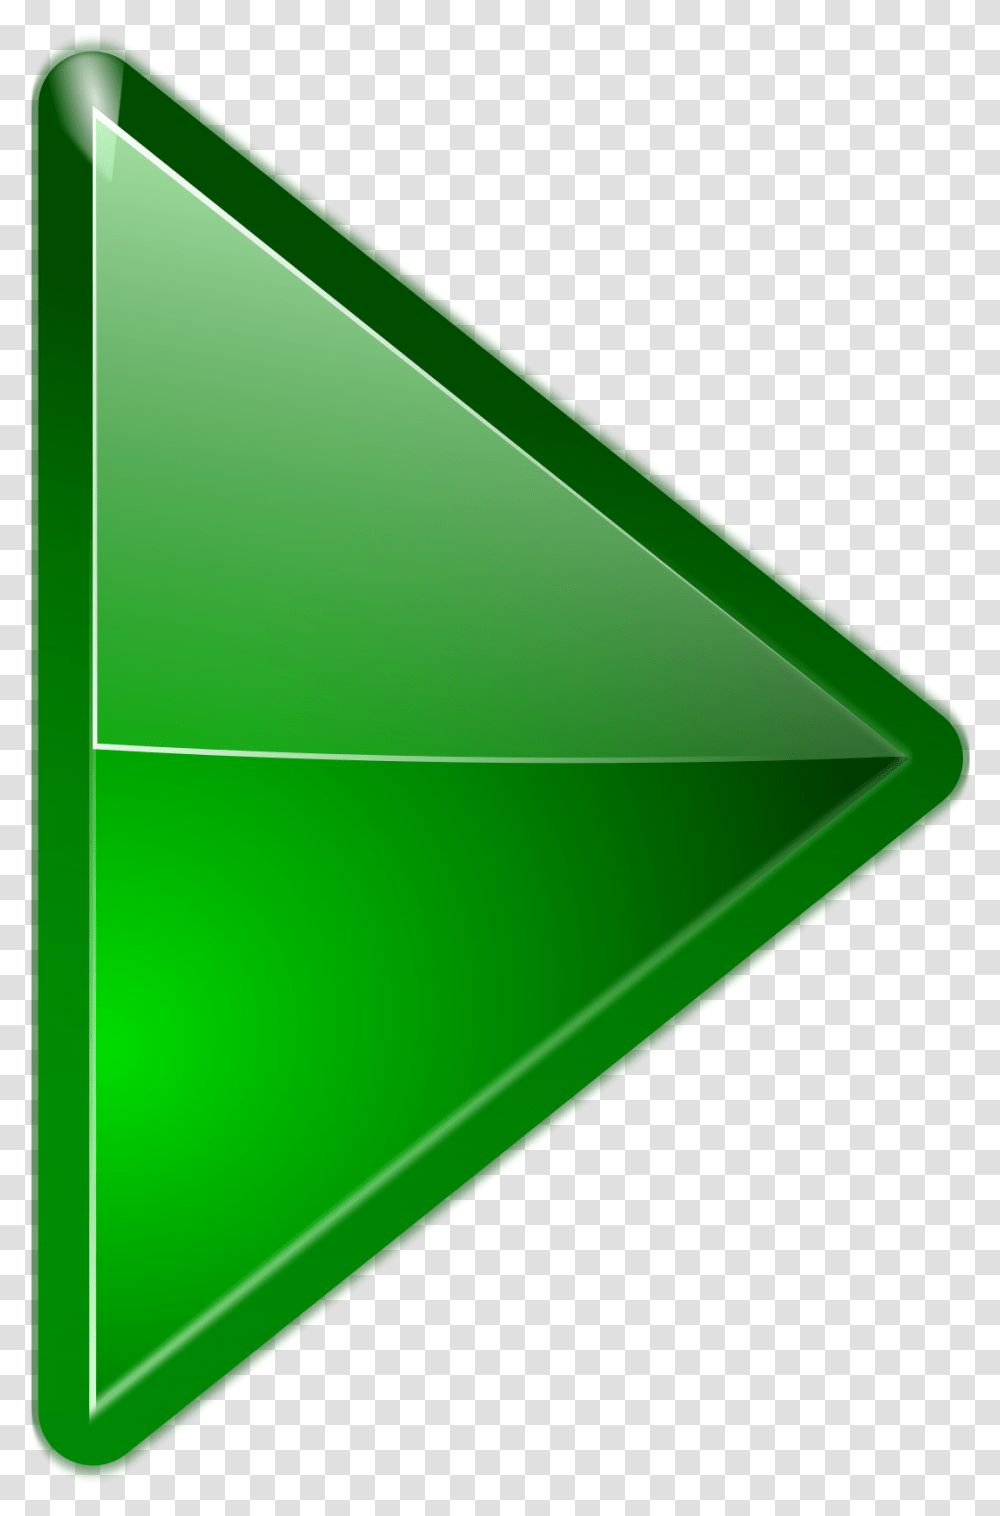 Small Arrow Icon Jpg Arrow Icon Small Sign, Triangle, Label Transparent Png